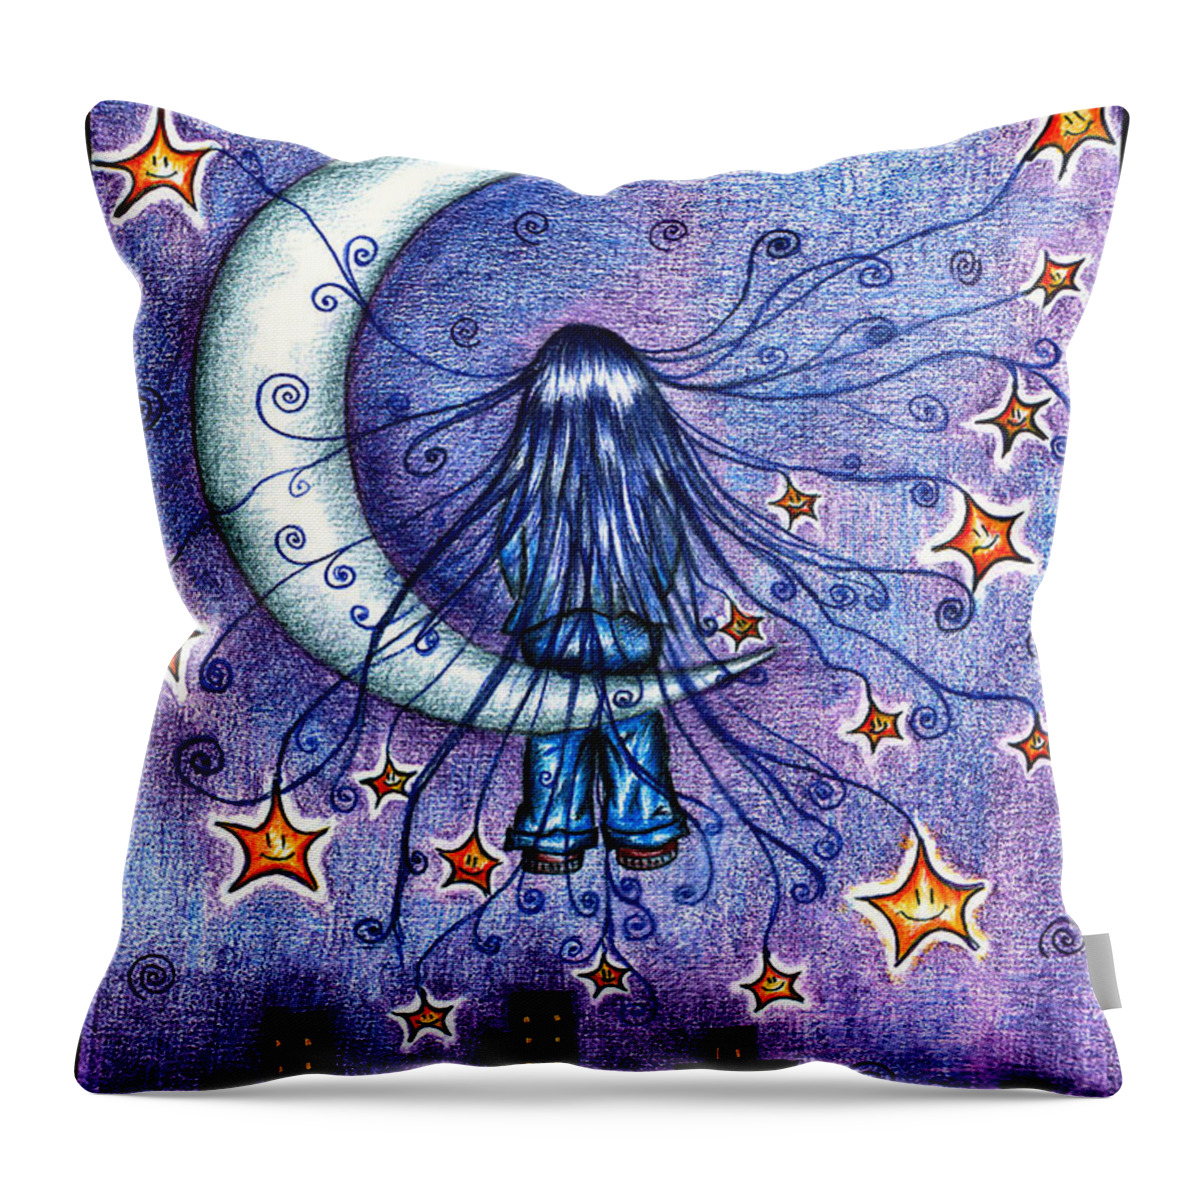 Moonchild Throw Pillow featuring the drawing Moonchild by Alex Greenshpun